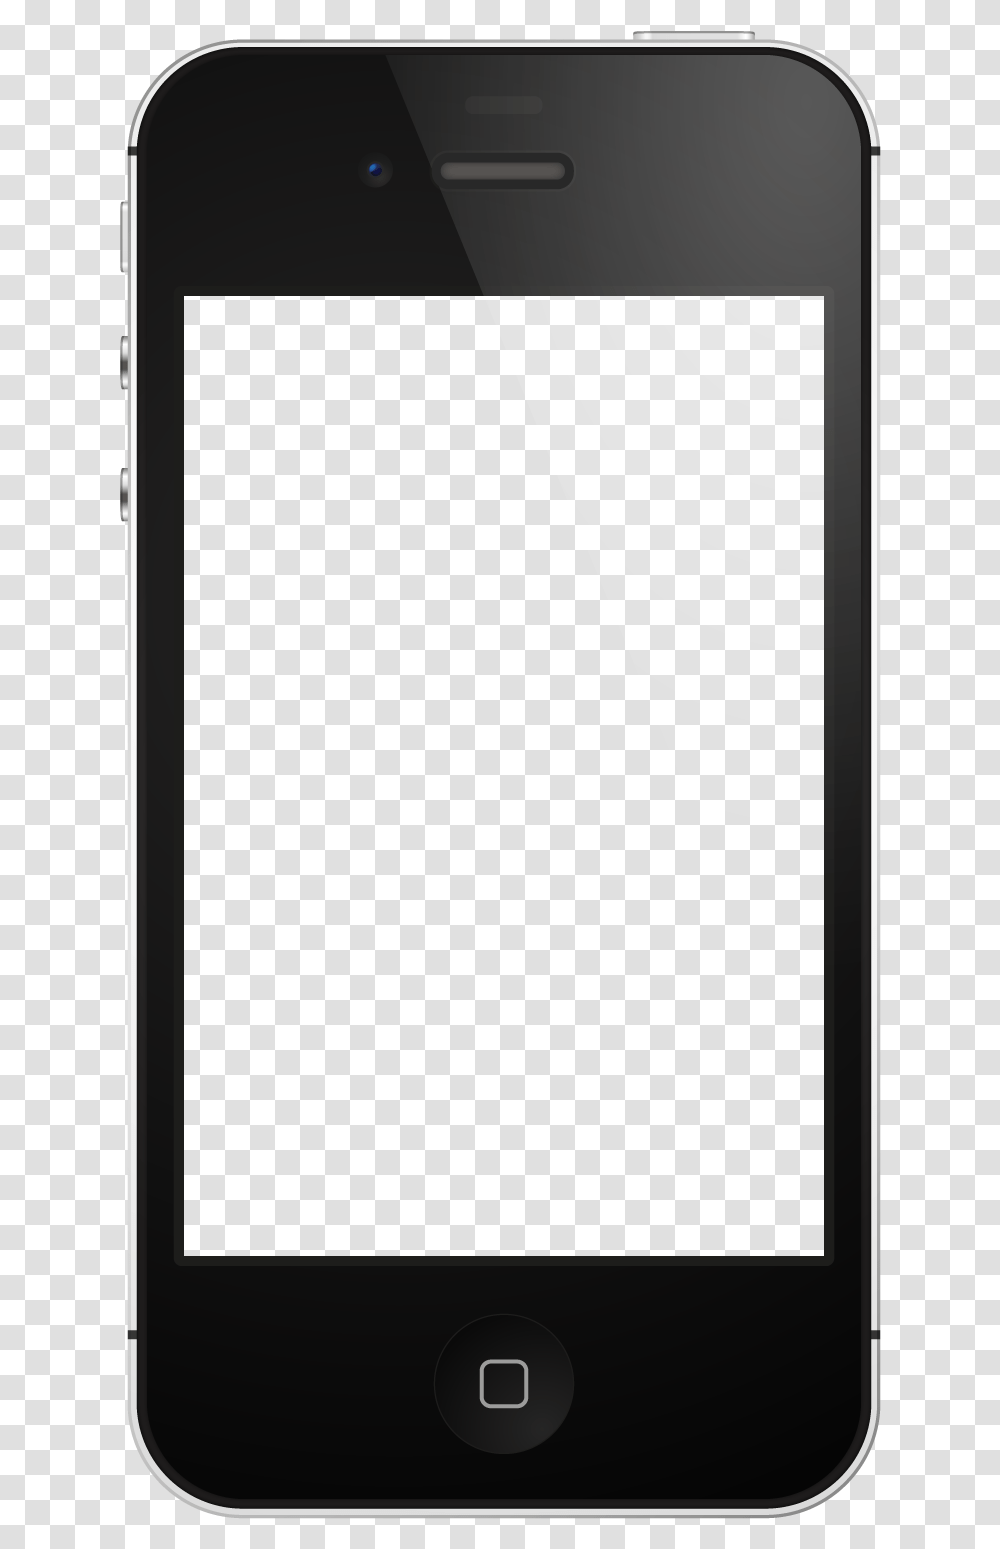 Iphone Template Blank App Screen Iphone, Mobile Phone, Electronics, Cell Phone Transparent Png